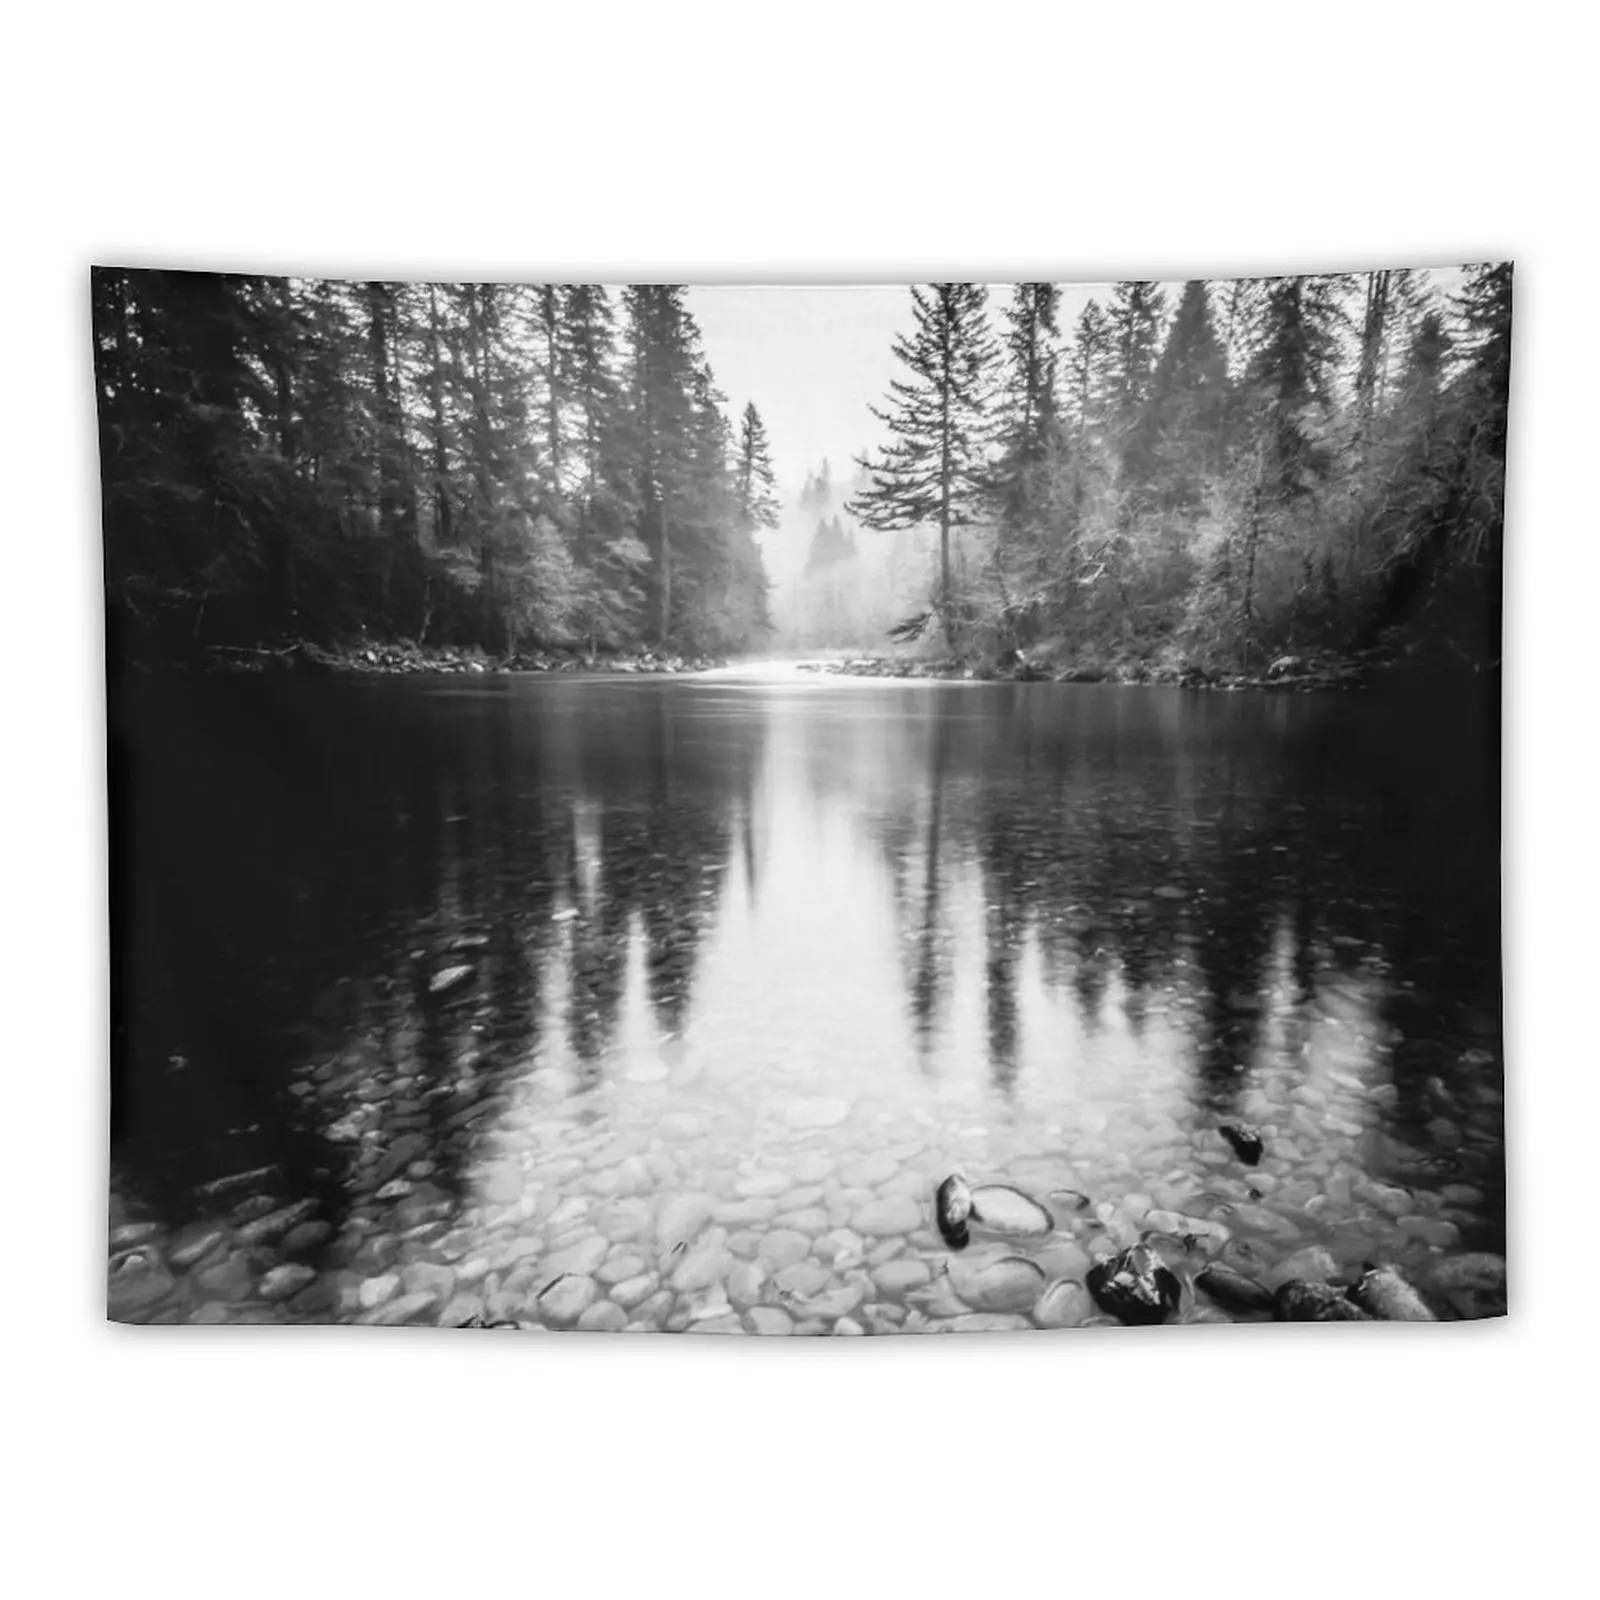 

Forest Reflection Lake - Black and White Nature Water Reflection Tapestry Cute Room Decor Bedroom Decor Tapestry